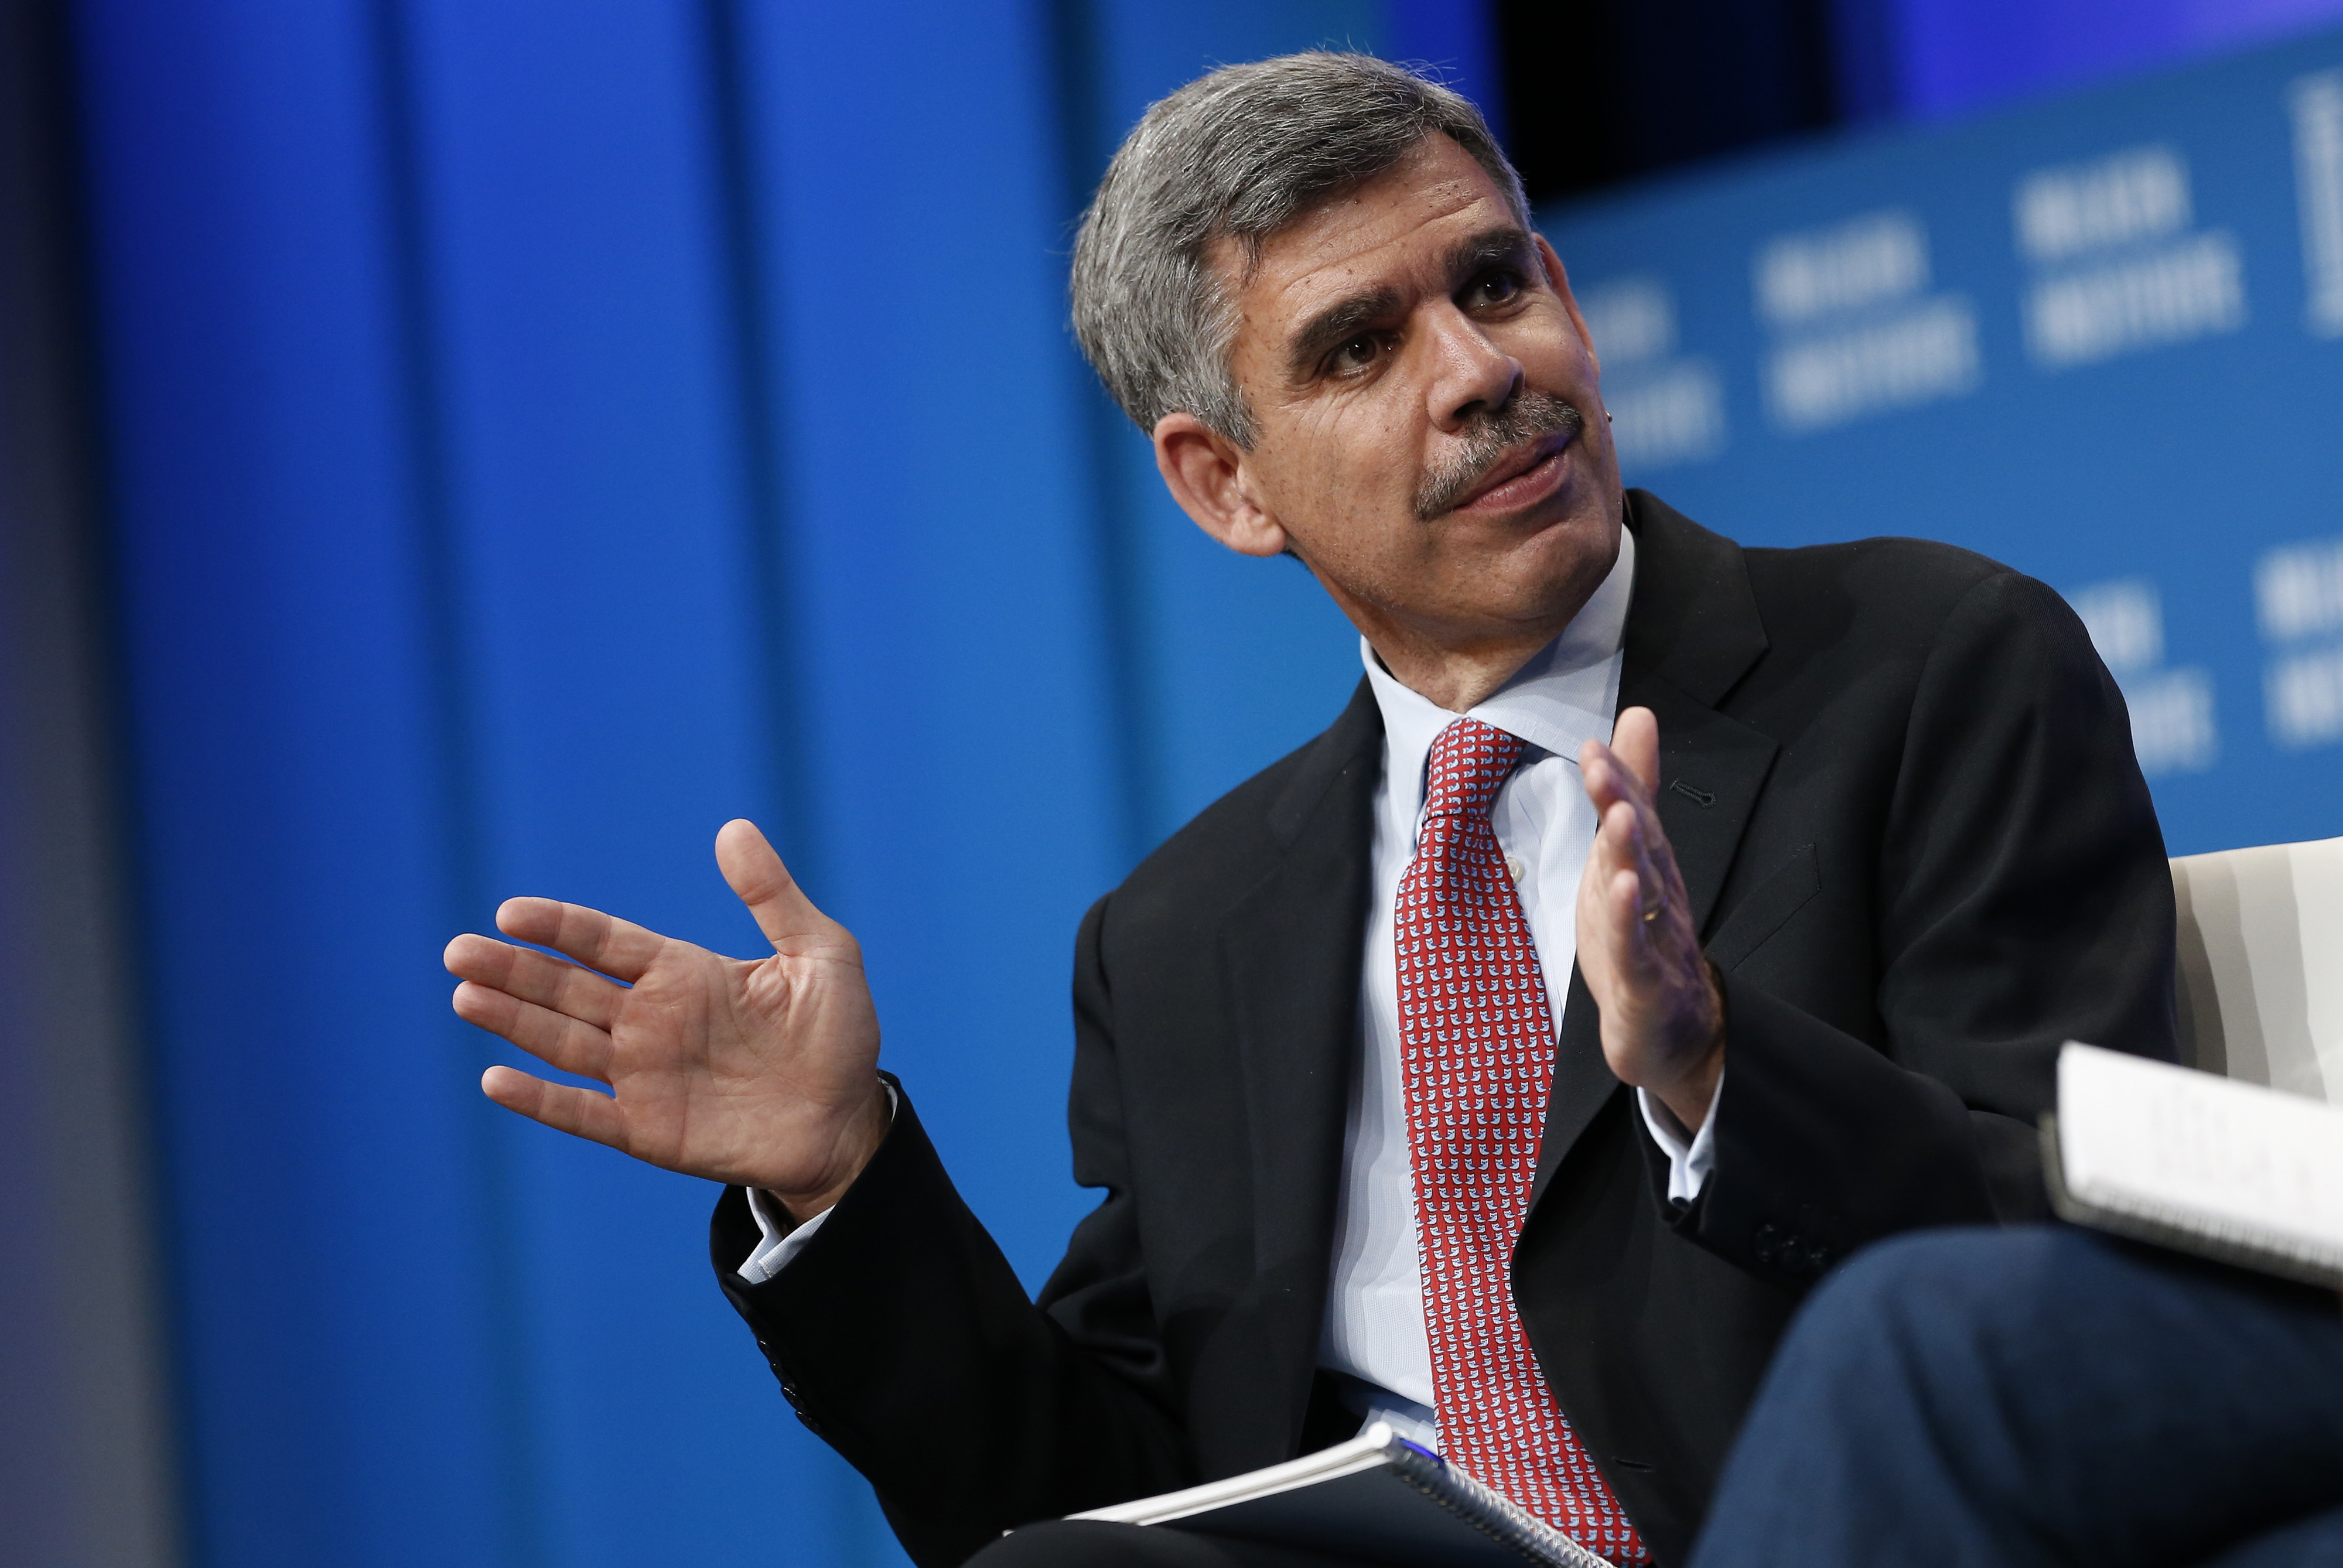 Mohamed El-Erian, chief economic advisor at Allianz SE, speaks during the annual Milken Institute Global Conference in Beverly Hills, California, U.S., on Monday, April 27, 2015. (Bloomberg—Bloomberg via Getty Images)